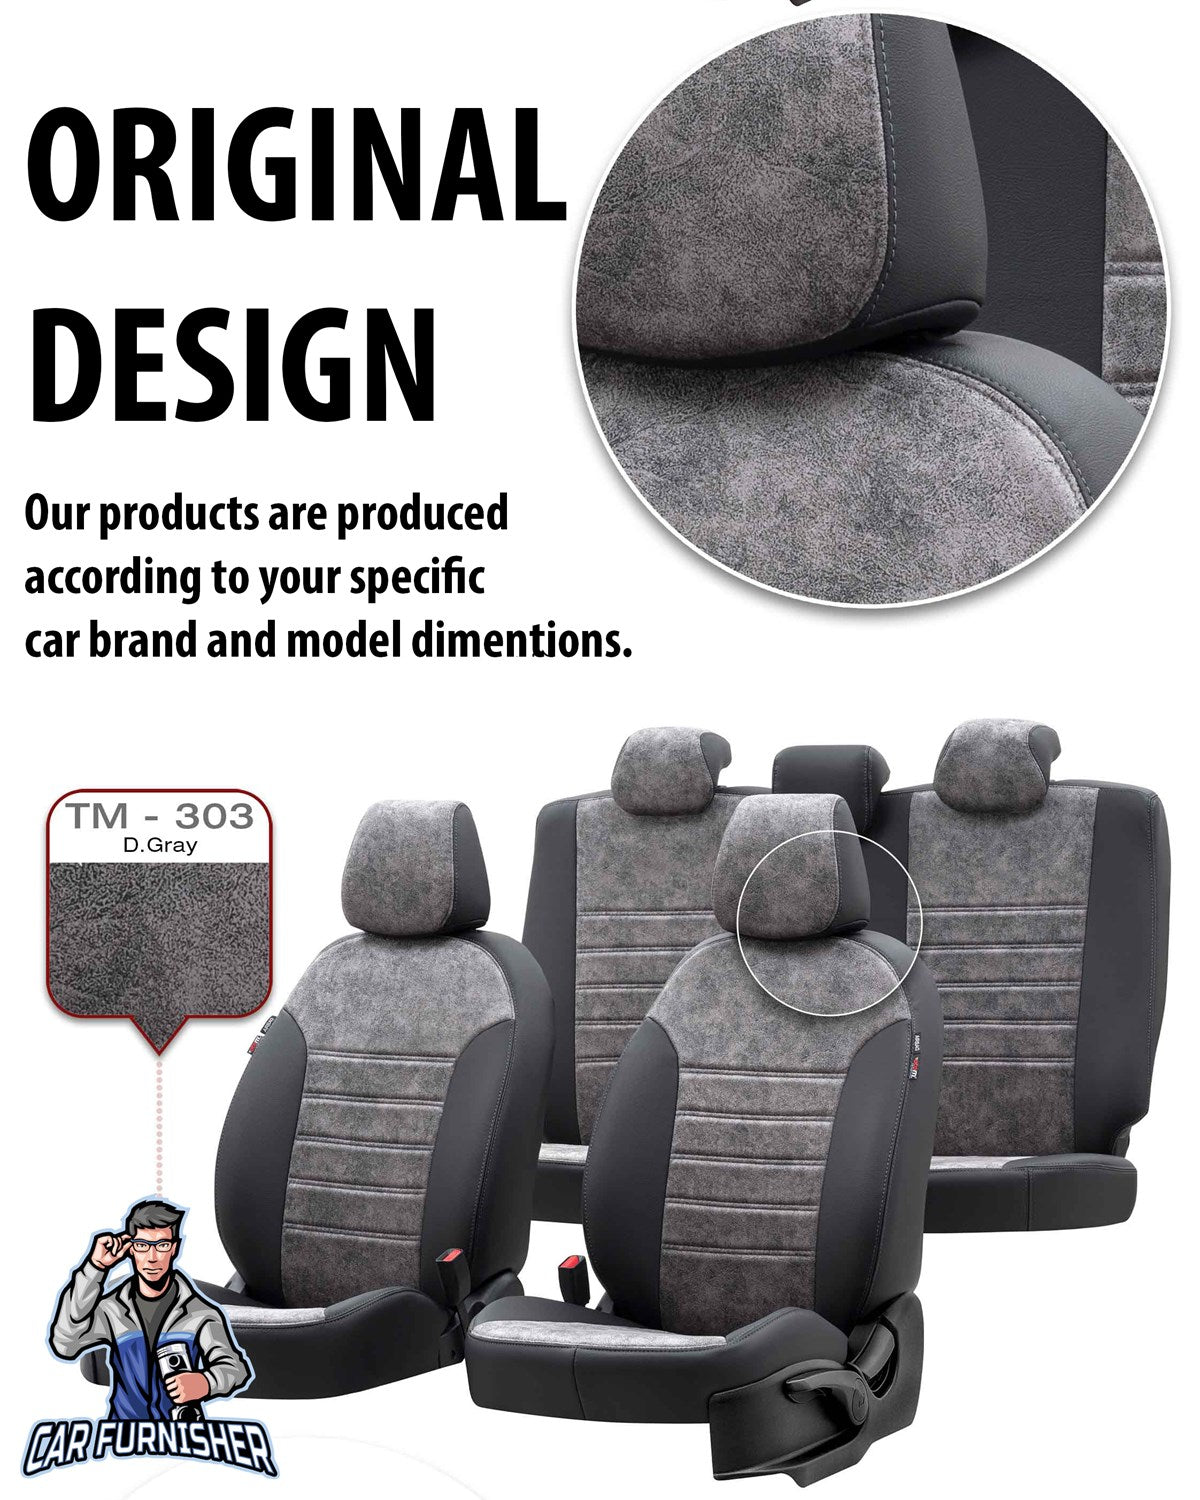 Honda Civic Seat Covers Milano Suede Design Smoked Black Leather & Suede Fabric